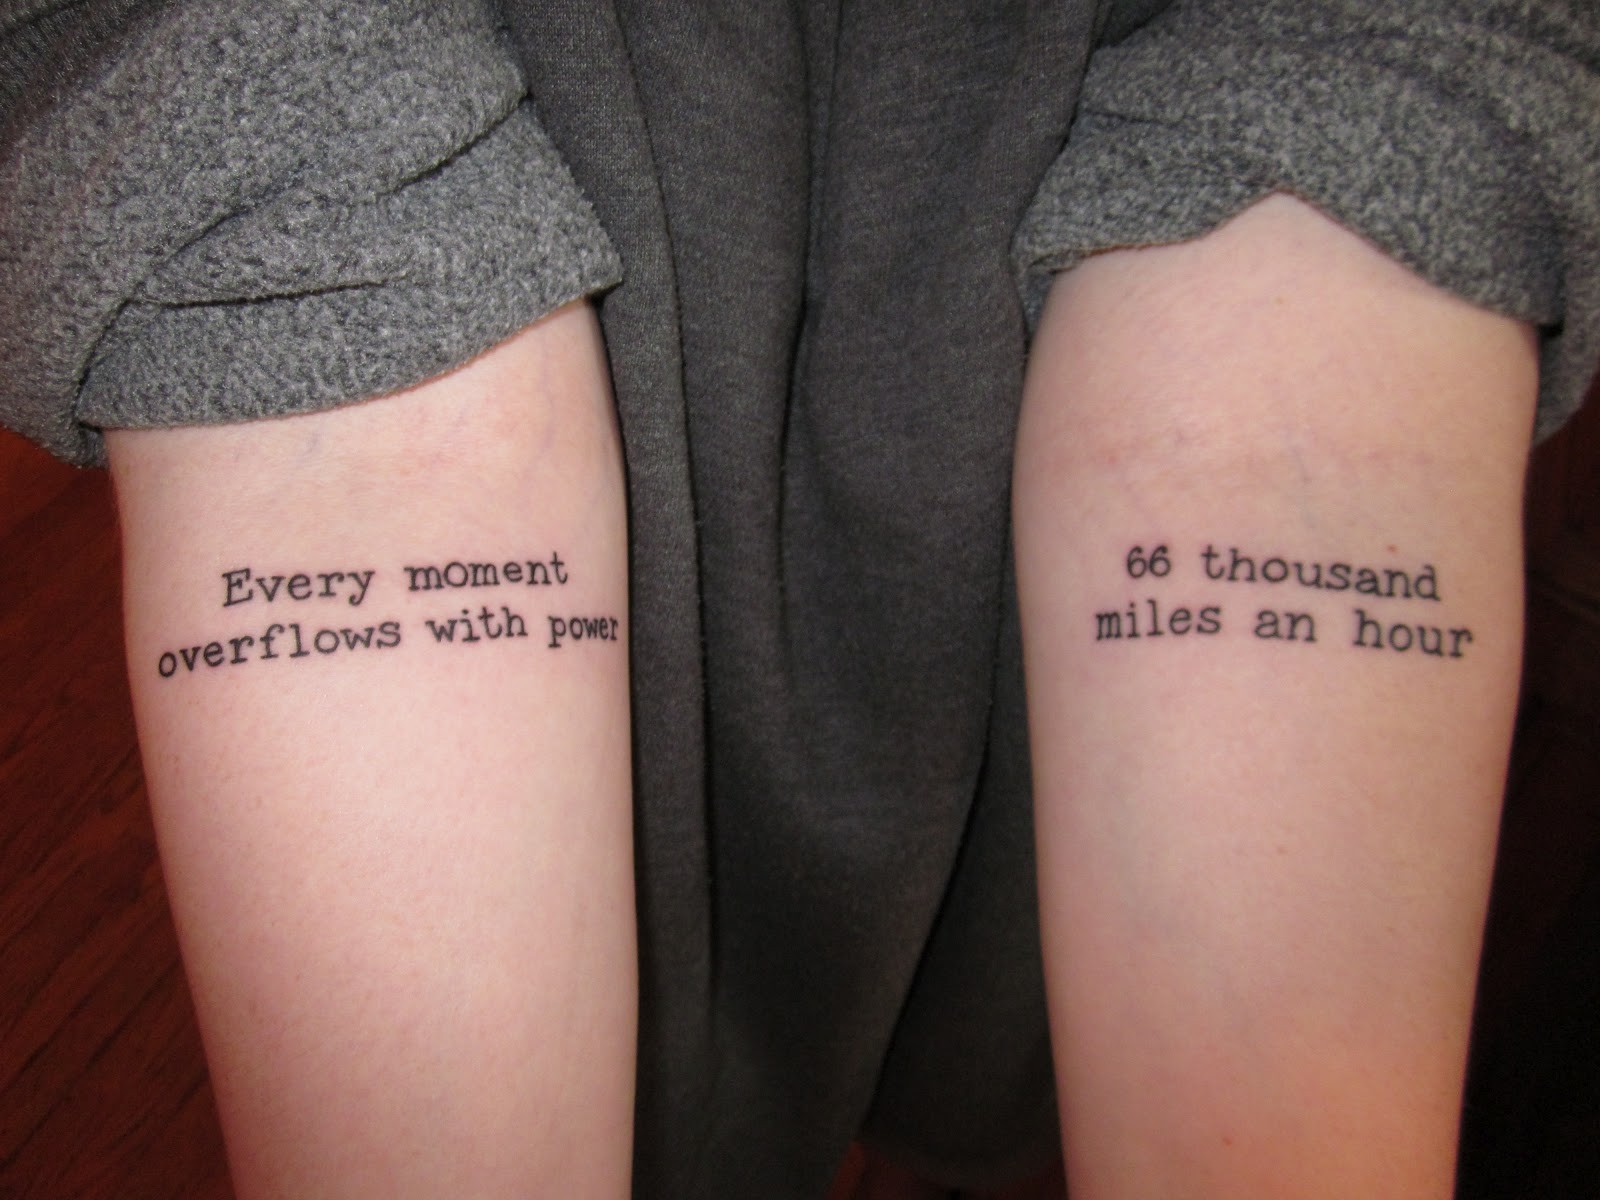 Quote Tattoos Designs, Ideas and Meaning | Tattoos For You